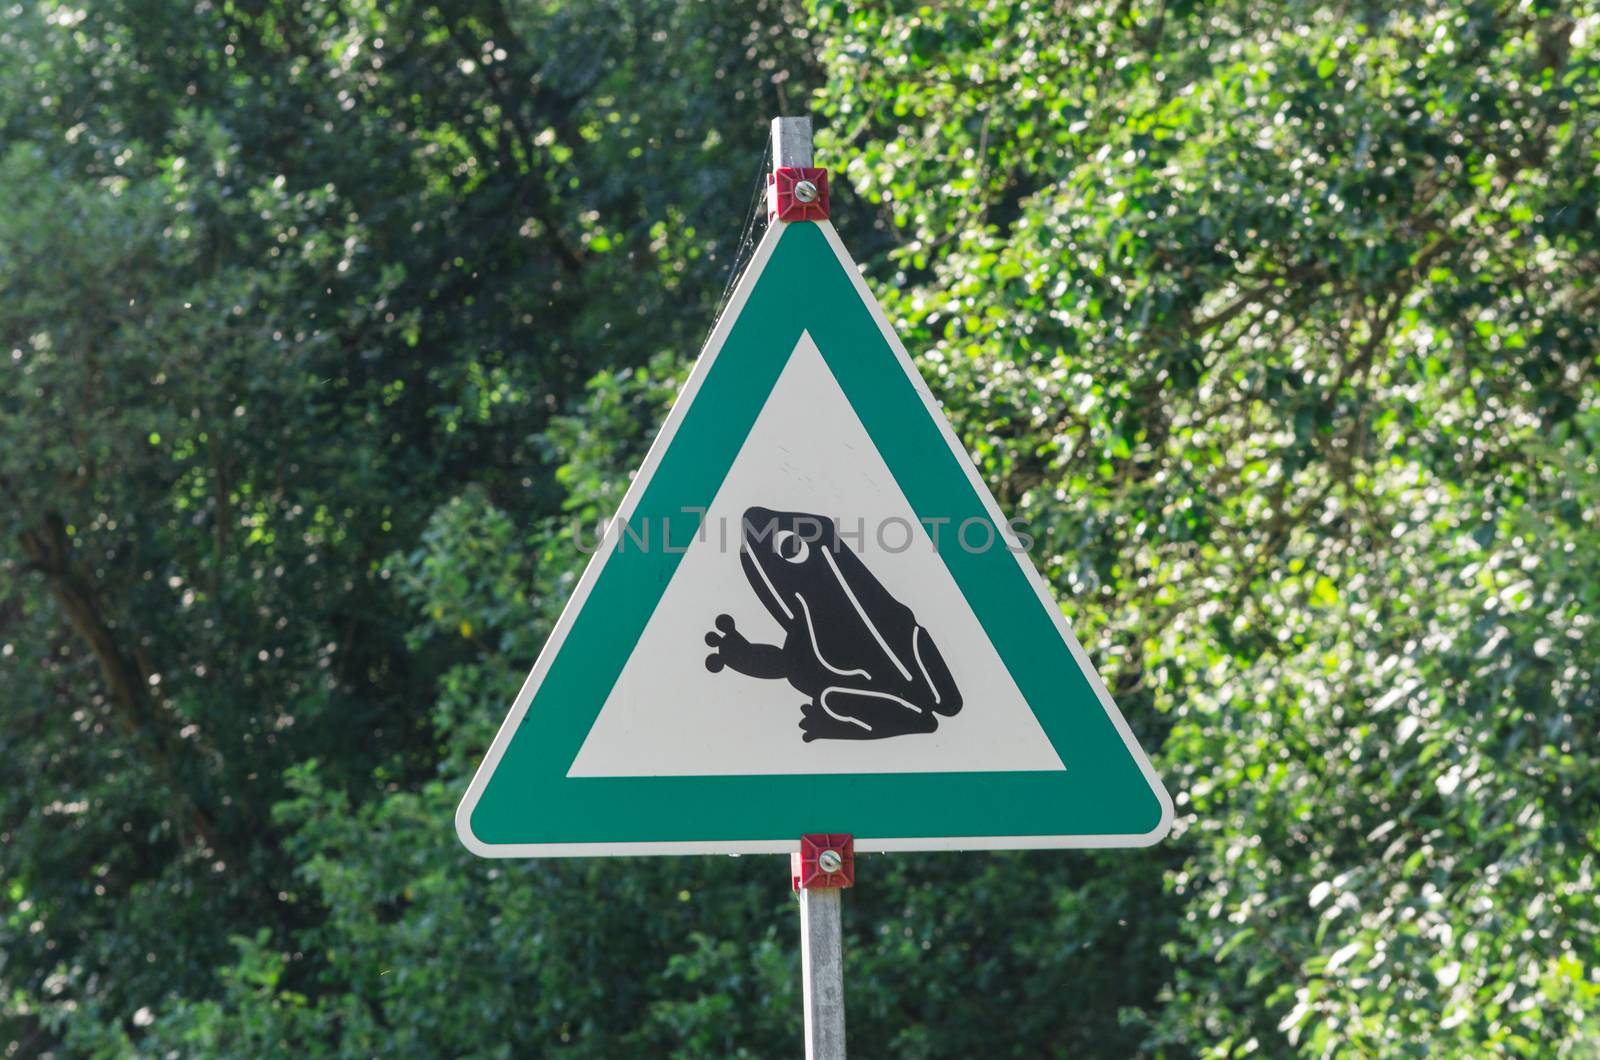 Triangular shield Caution toads and frogs cross         by JFsPic